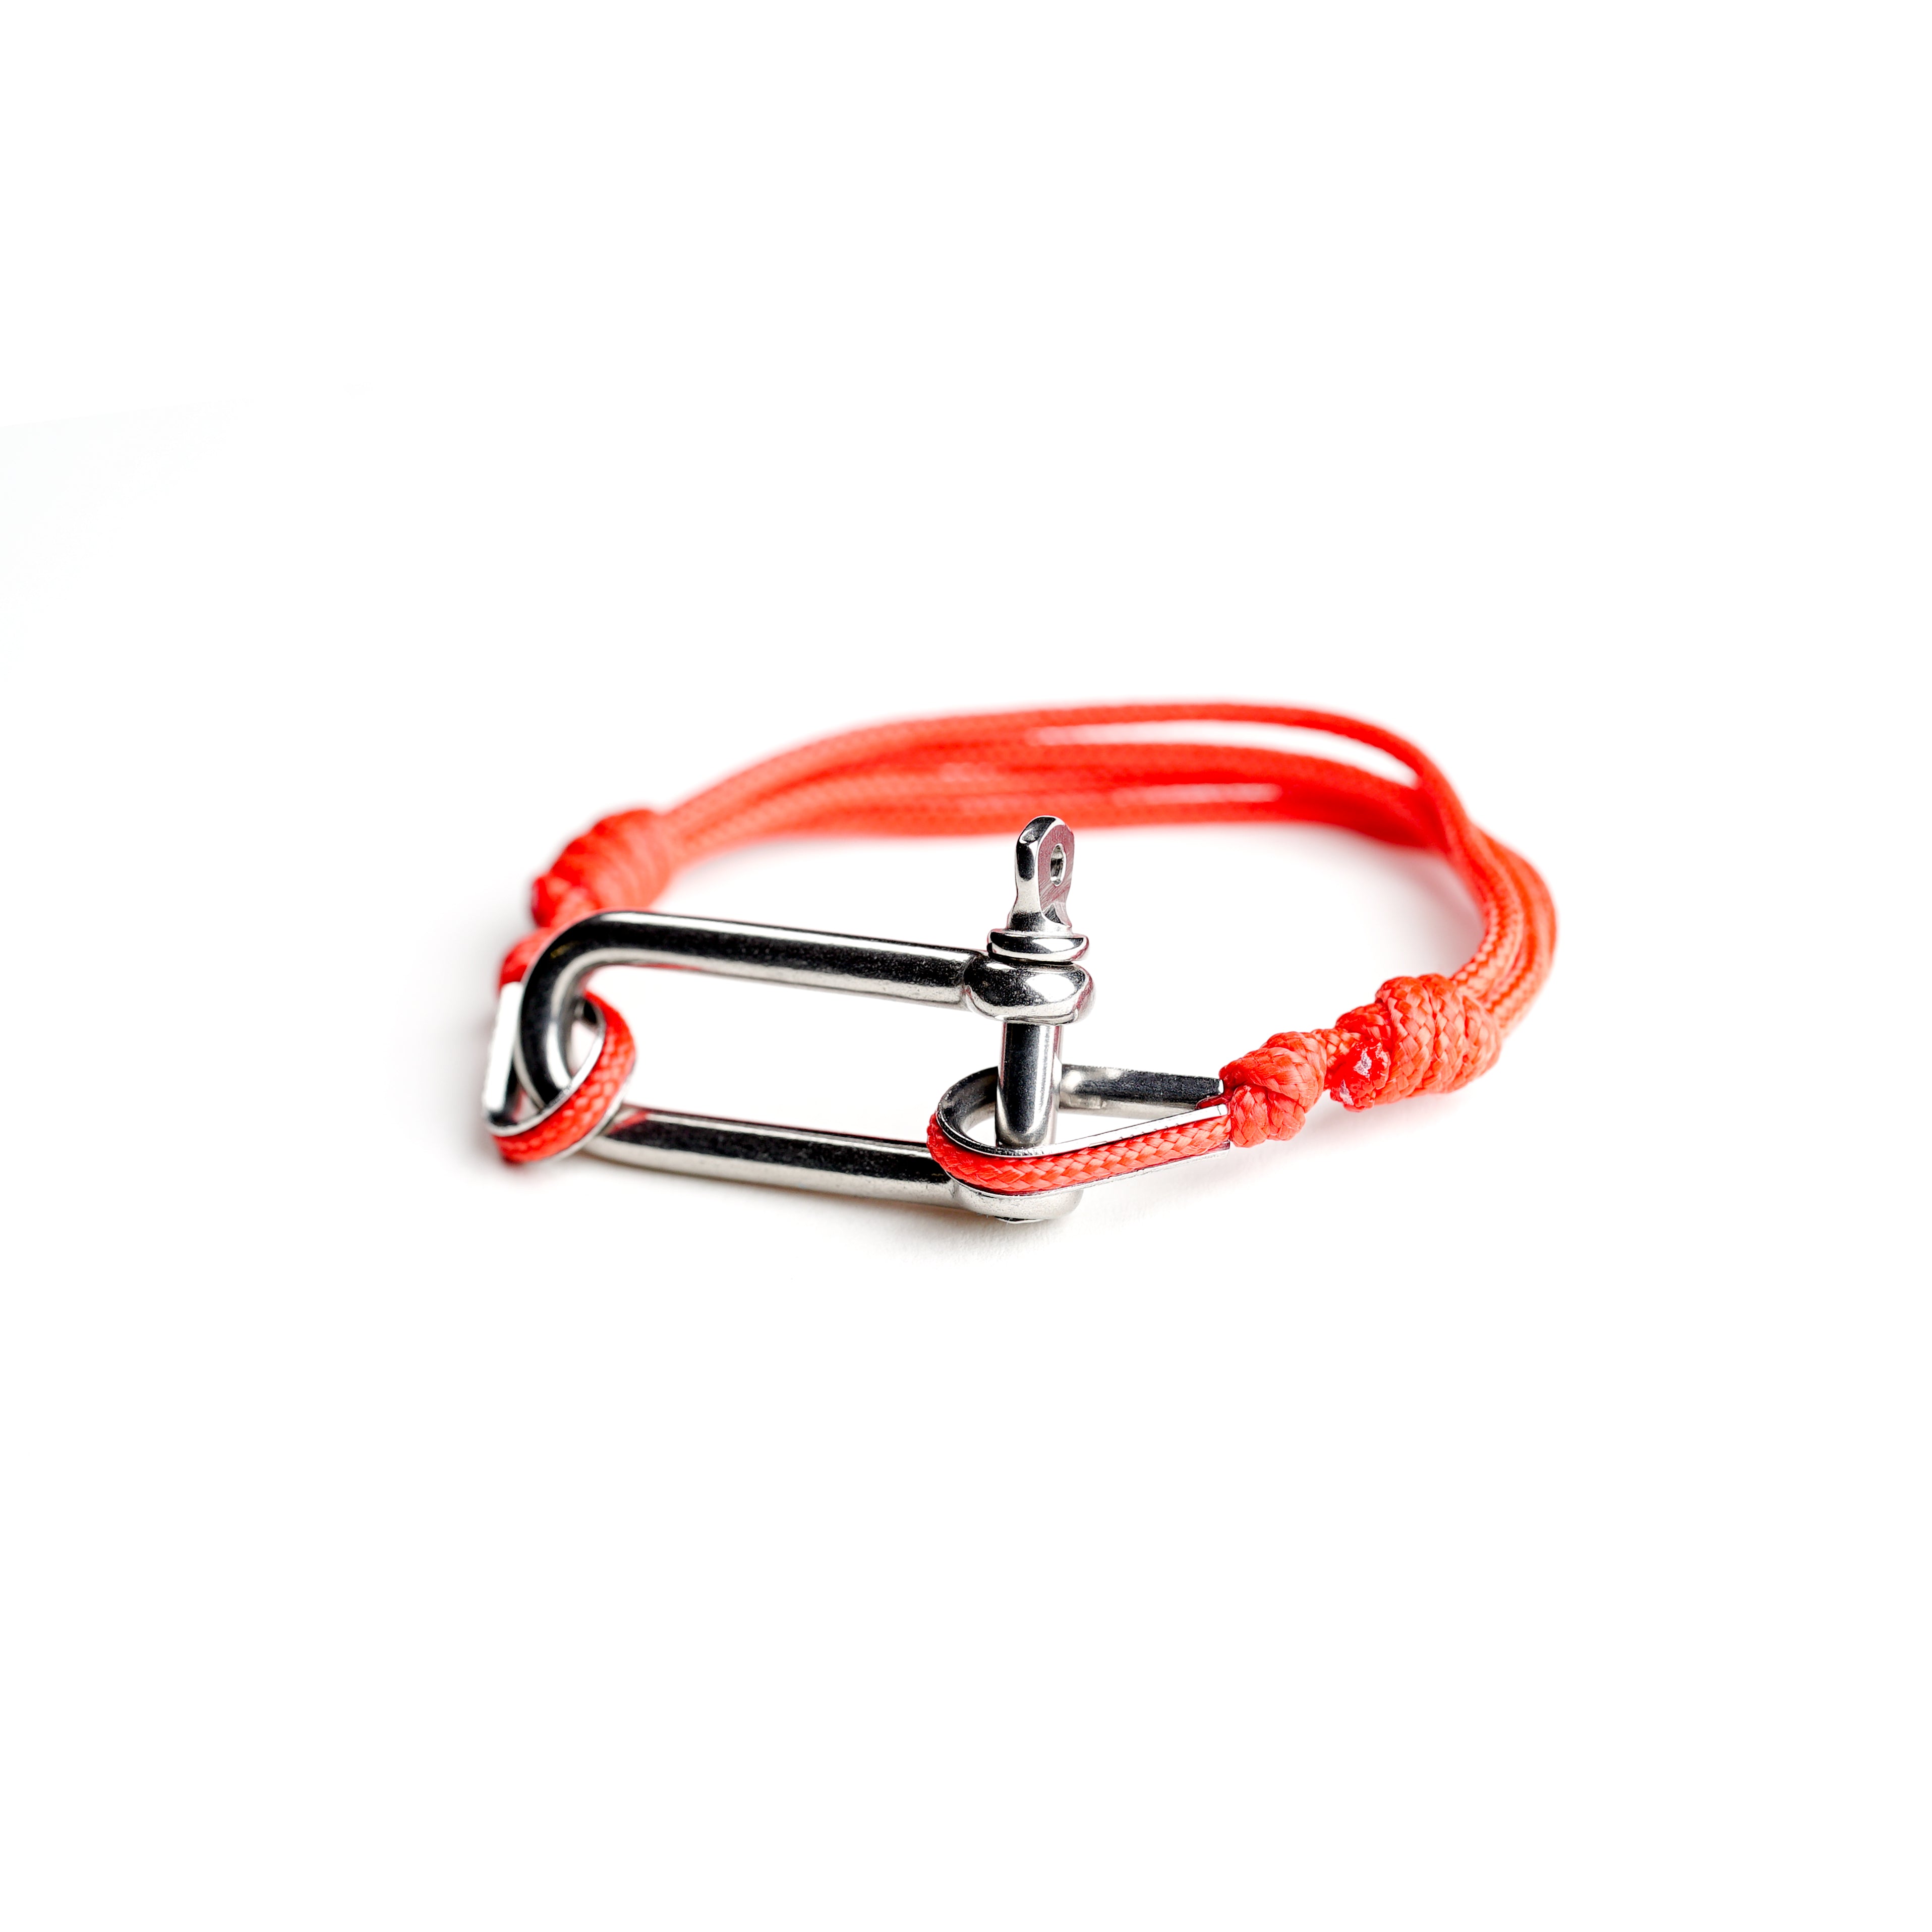 Necklush Paracord Bracelet / Red / w Stainless Steel Nautical Shackle